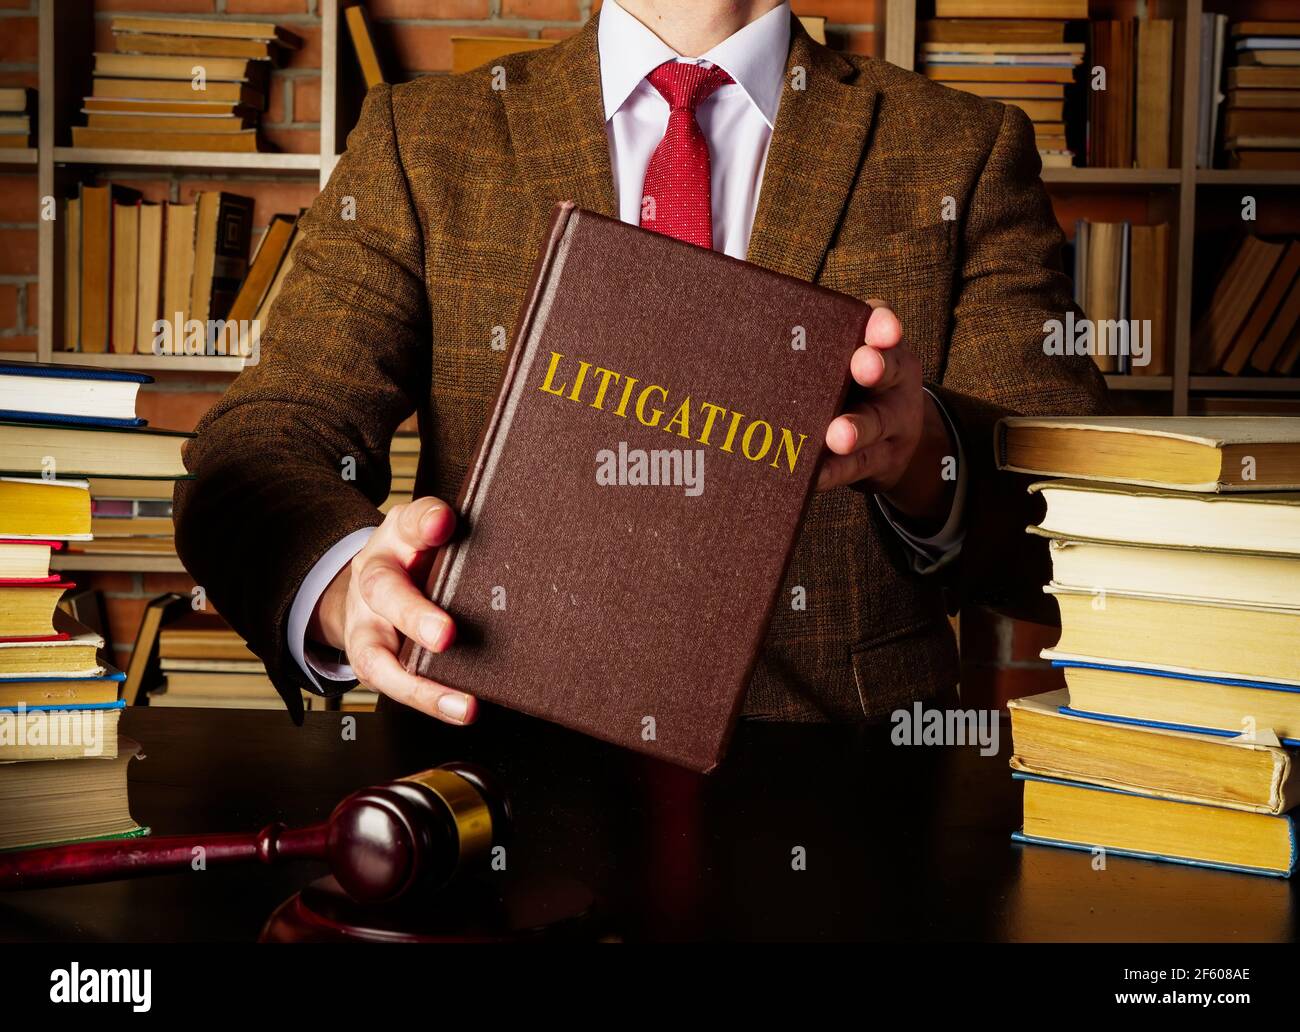 Book about Litigation in the lawyer hands. Stock Photo